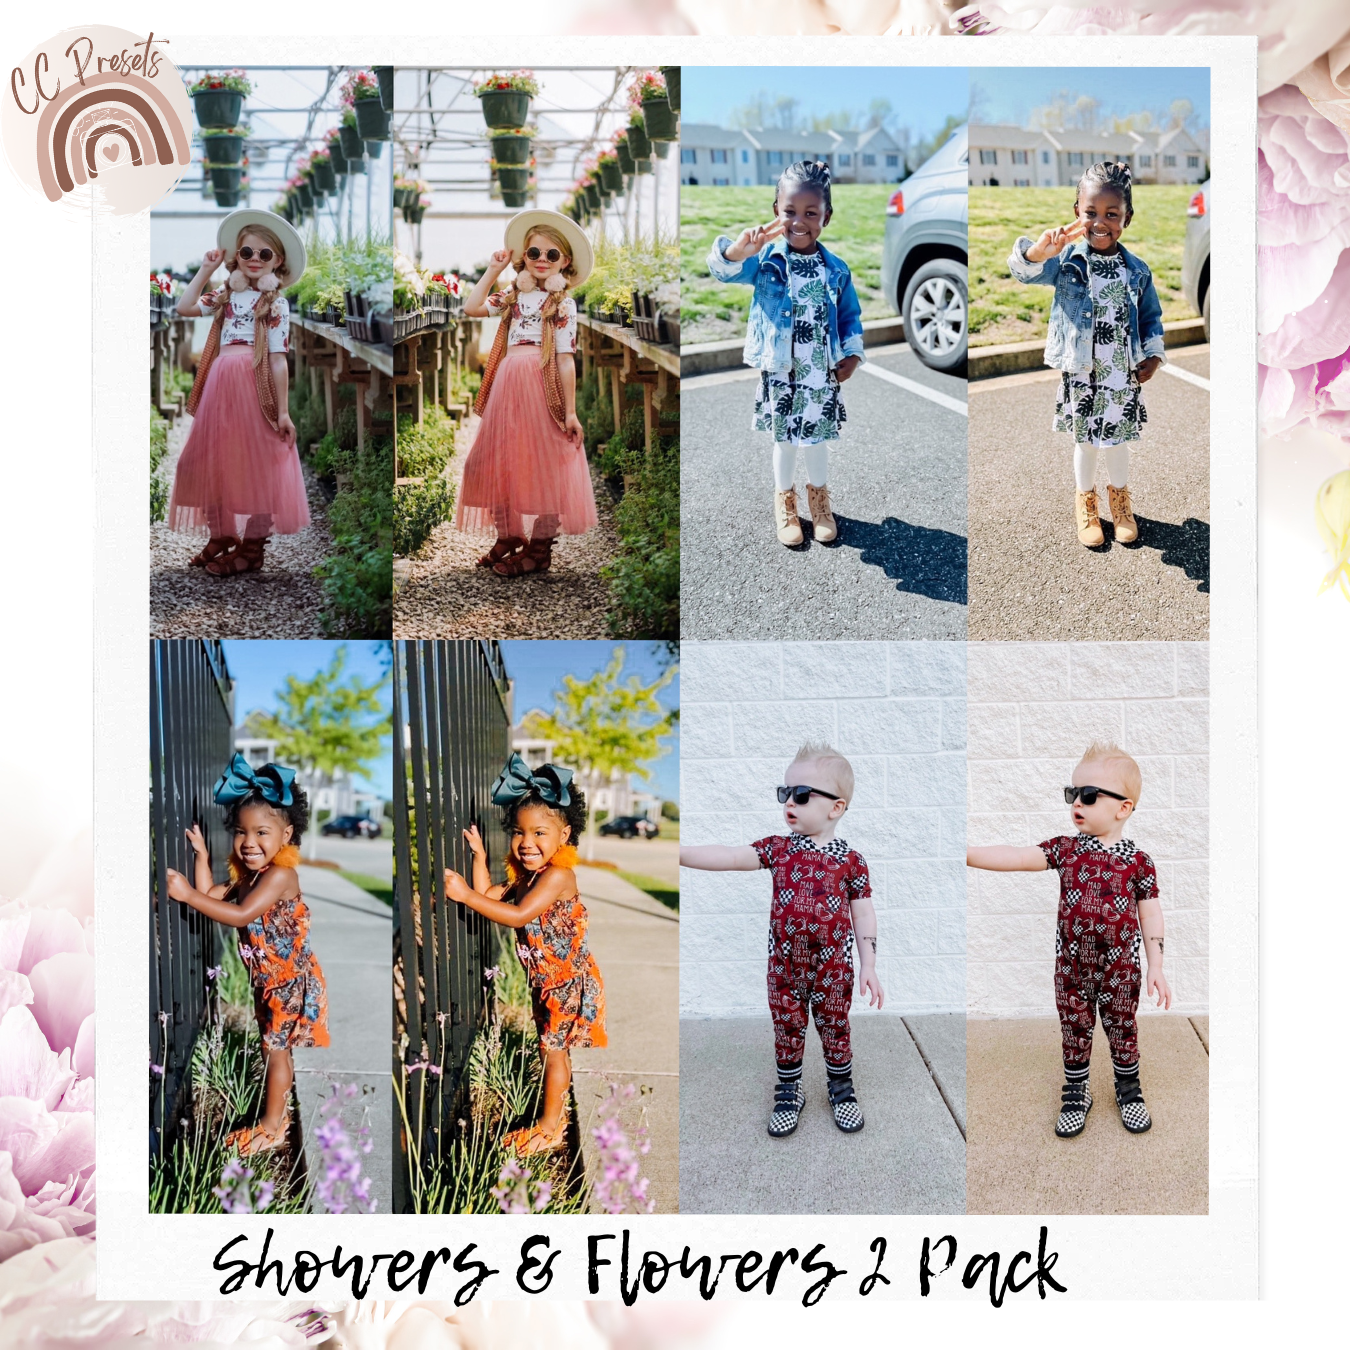 Showers & Flowers 2 Pack